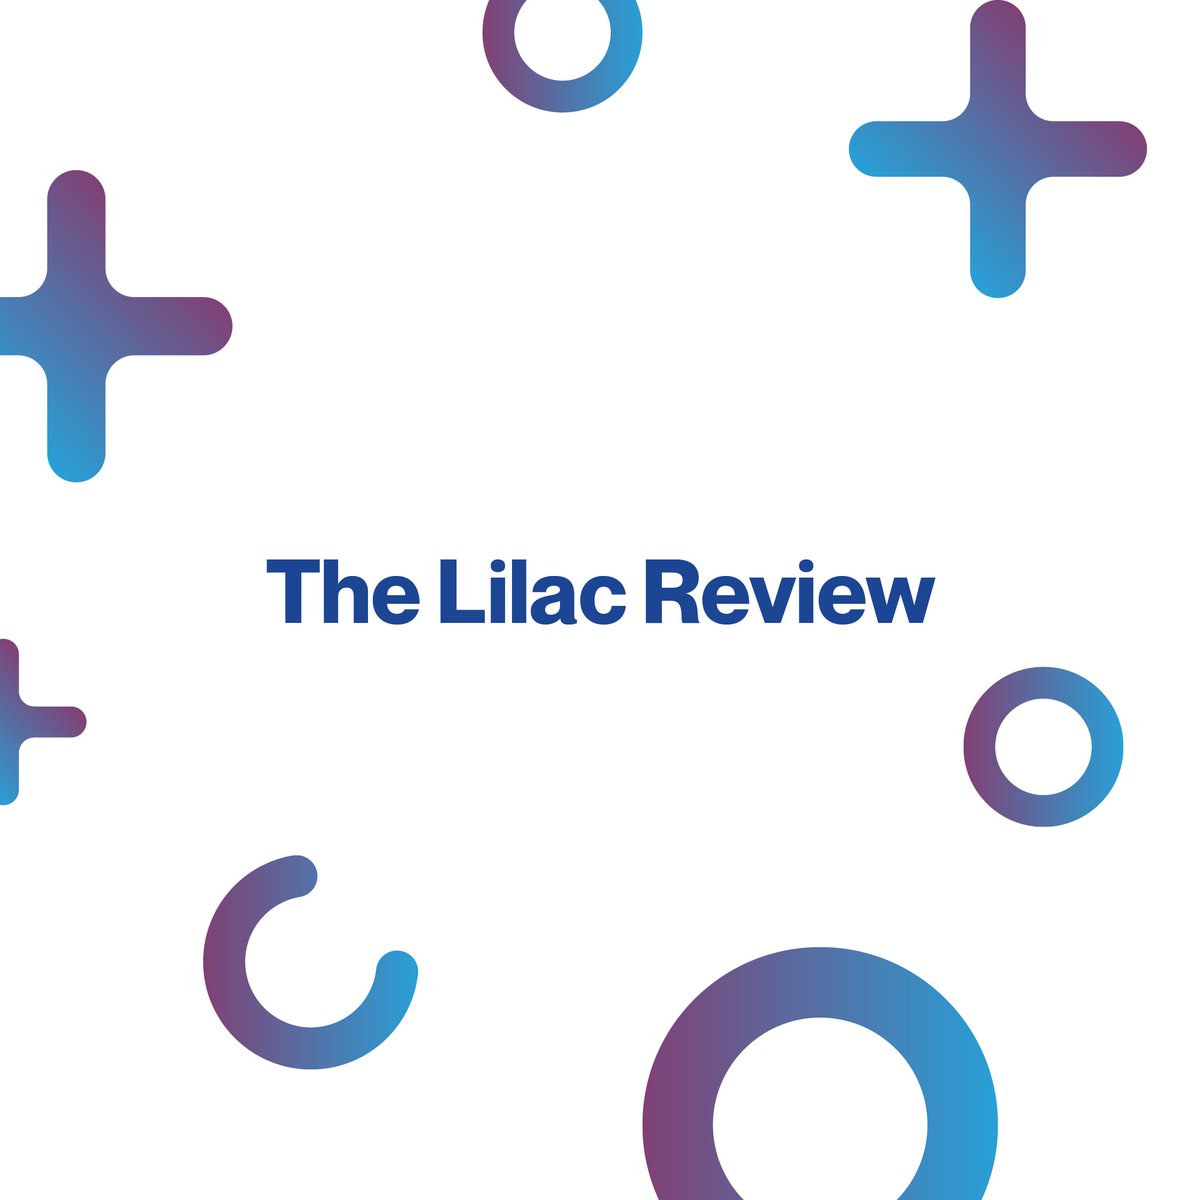 We are excited to announce that we have launched a Lilac Review YouTube channel. Having videos available via YouTube will make it easier for others to share content that they find interesting and we would love for you to subscribe. Watch and subscribe: ow.ly/WQQ650QIJeh